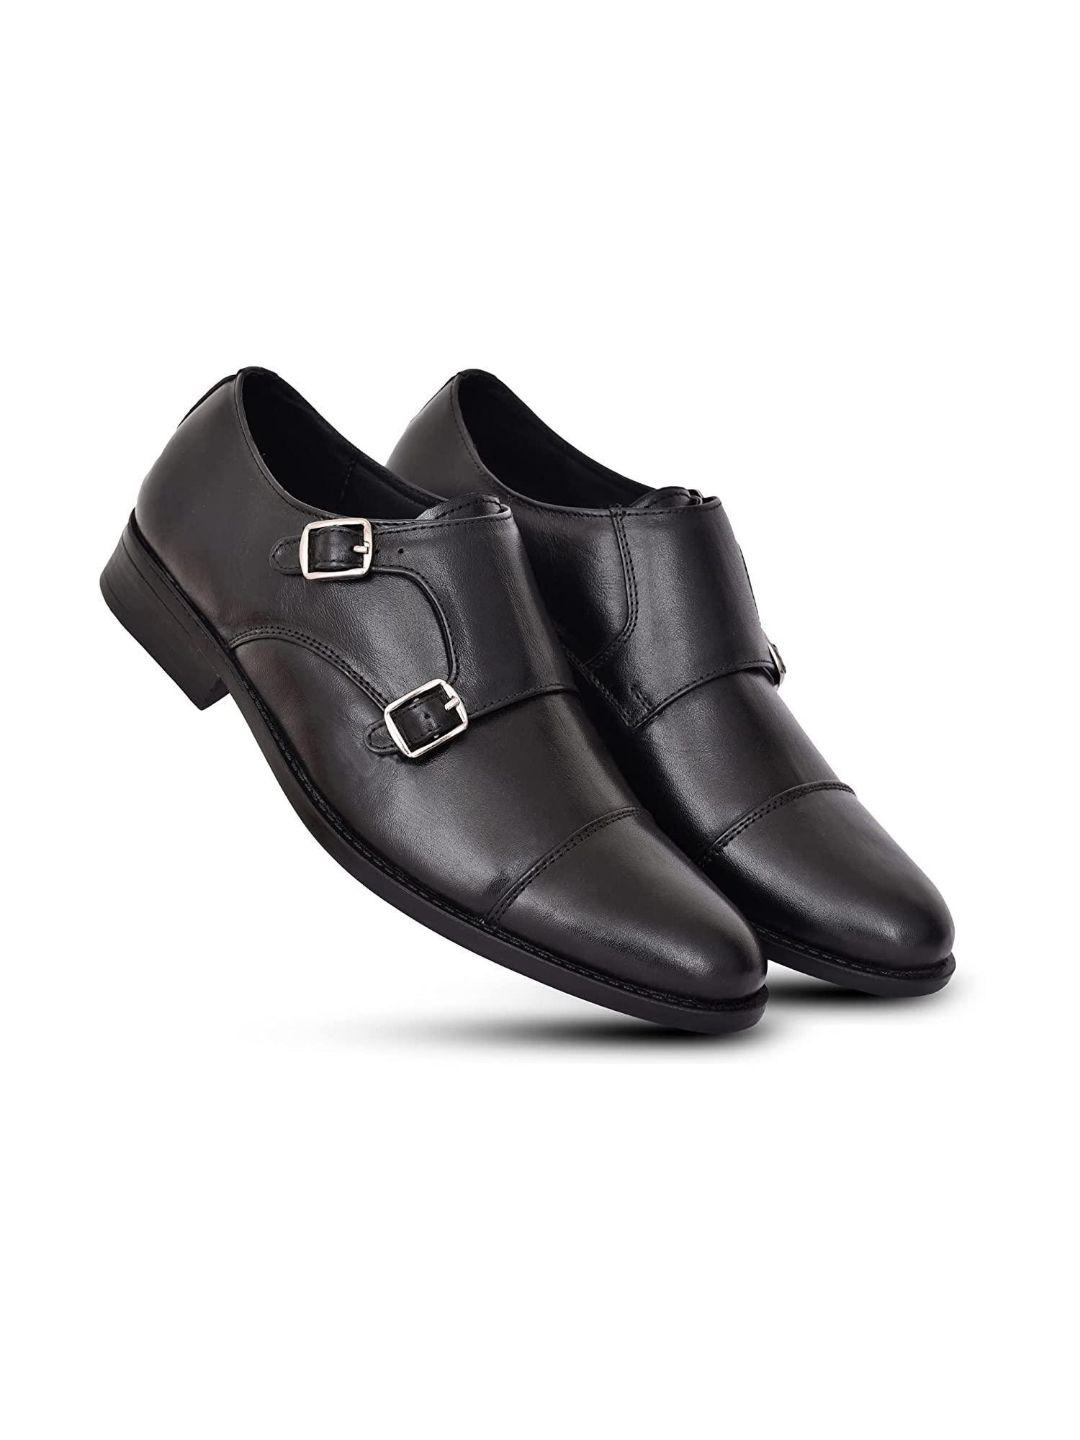 Maeve and Shelby Mens Formal Buckle Leather Double Monk Strap Shoes | Office Use